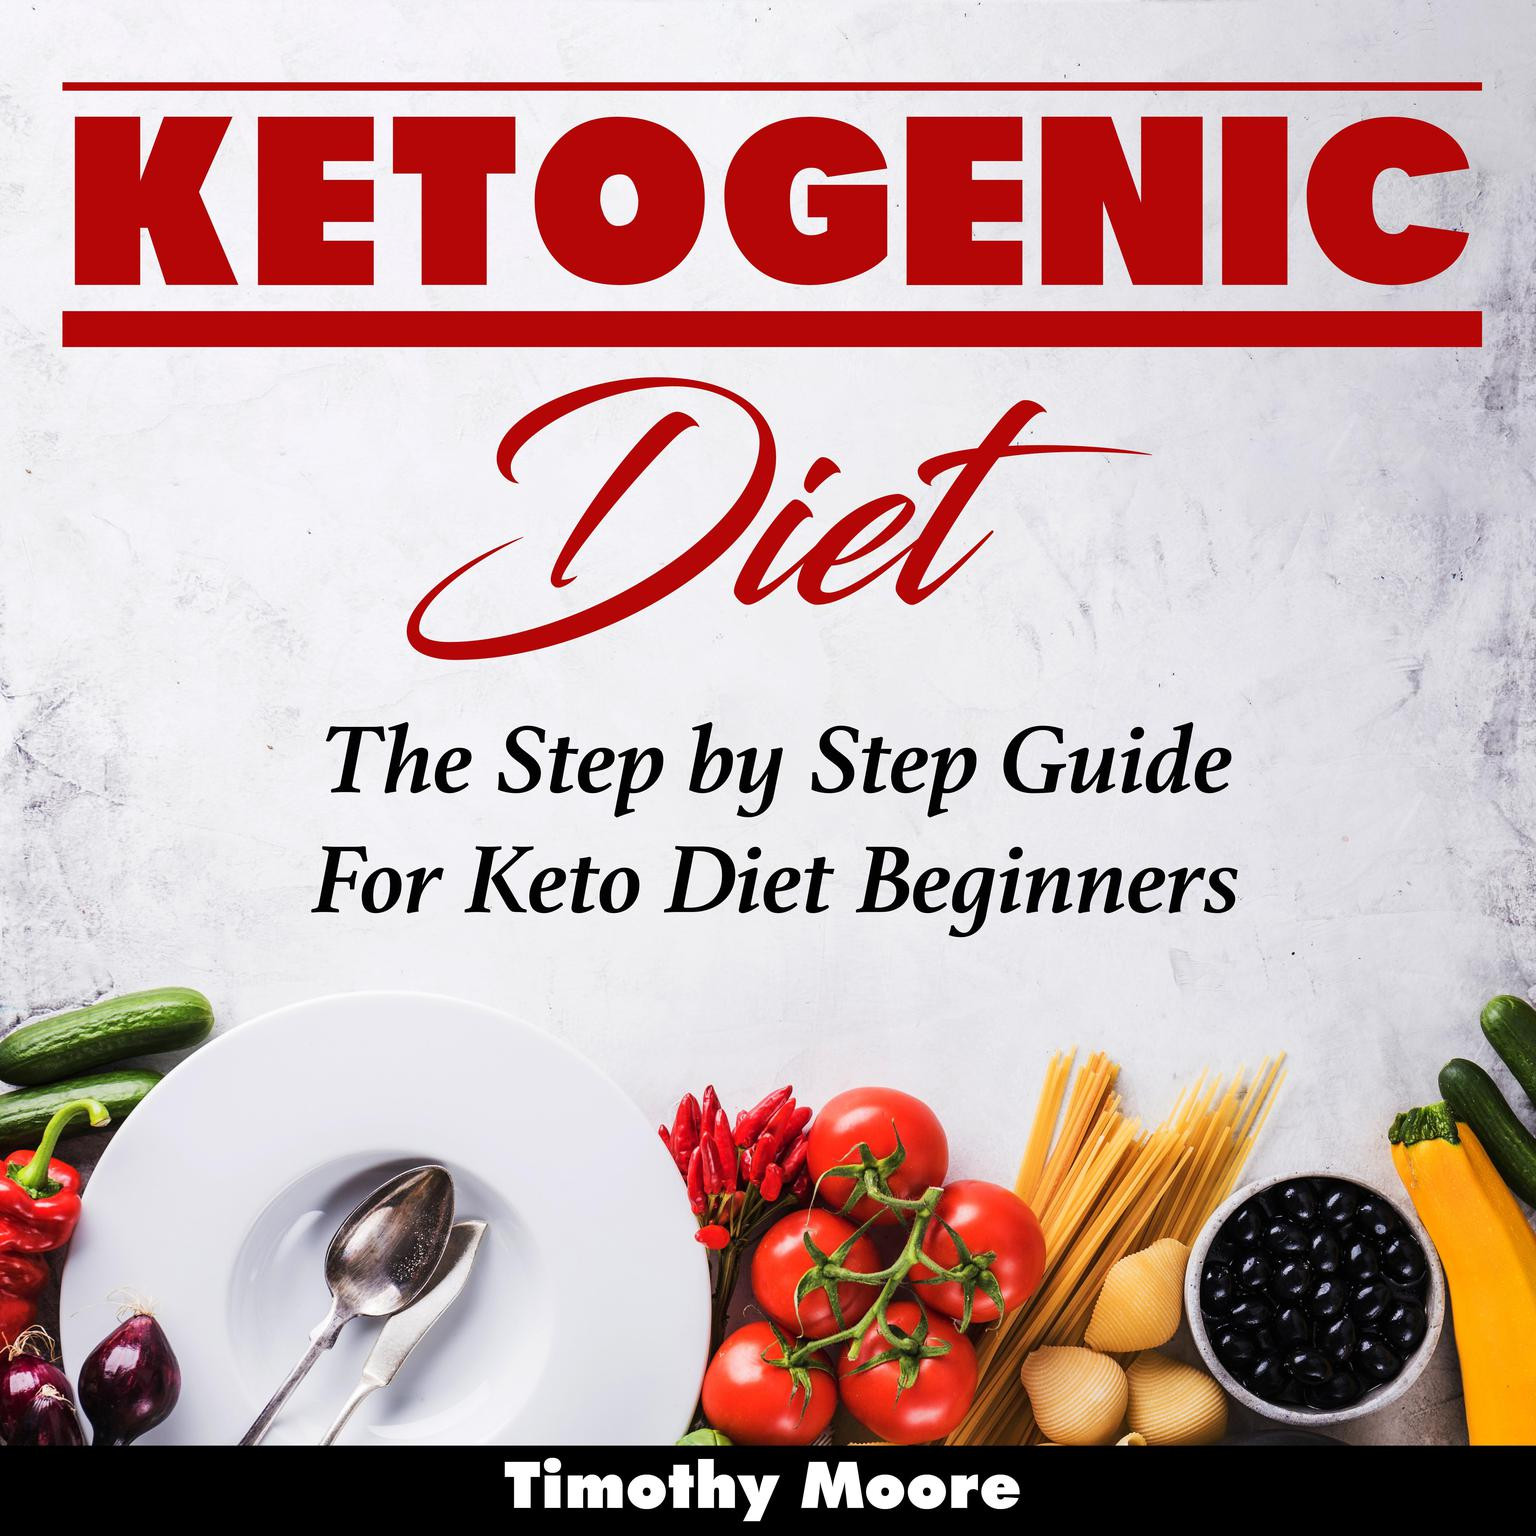 Step By Step Keto For Beginners
 Ketogenic Diet The Step by Step Guide For Keto Diet